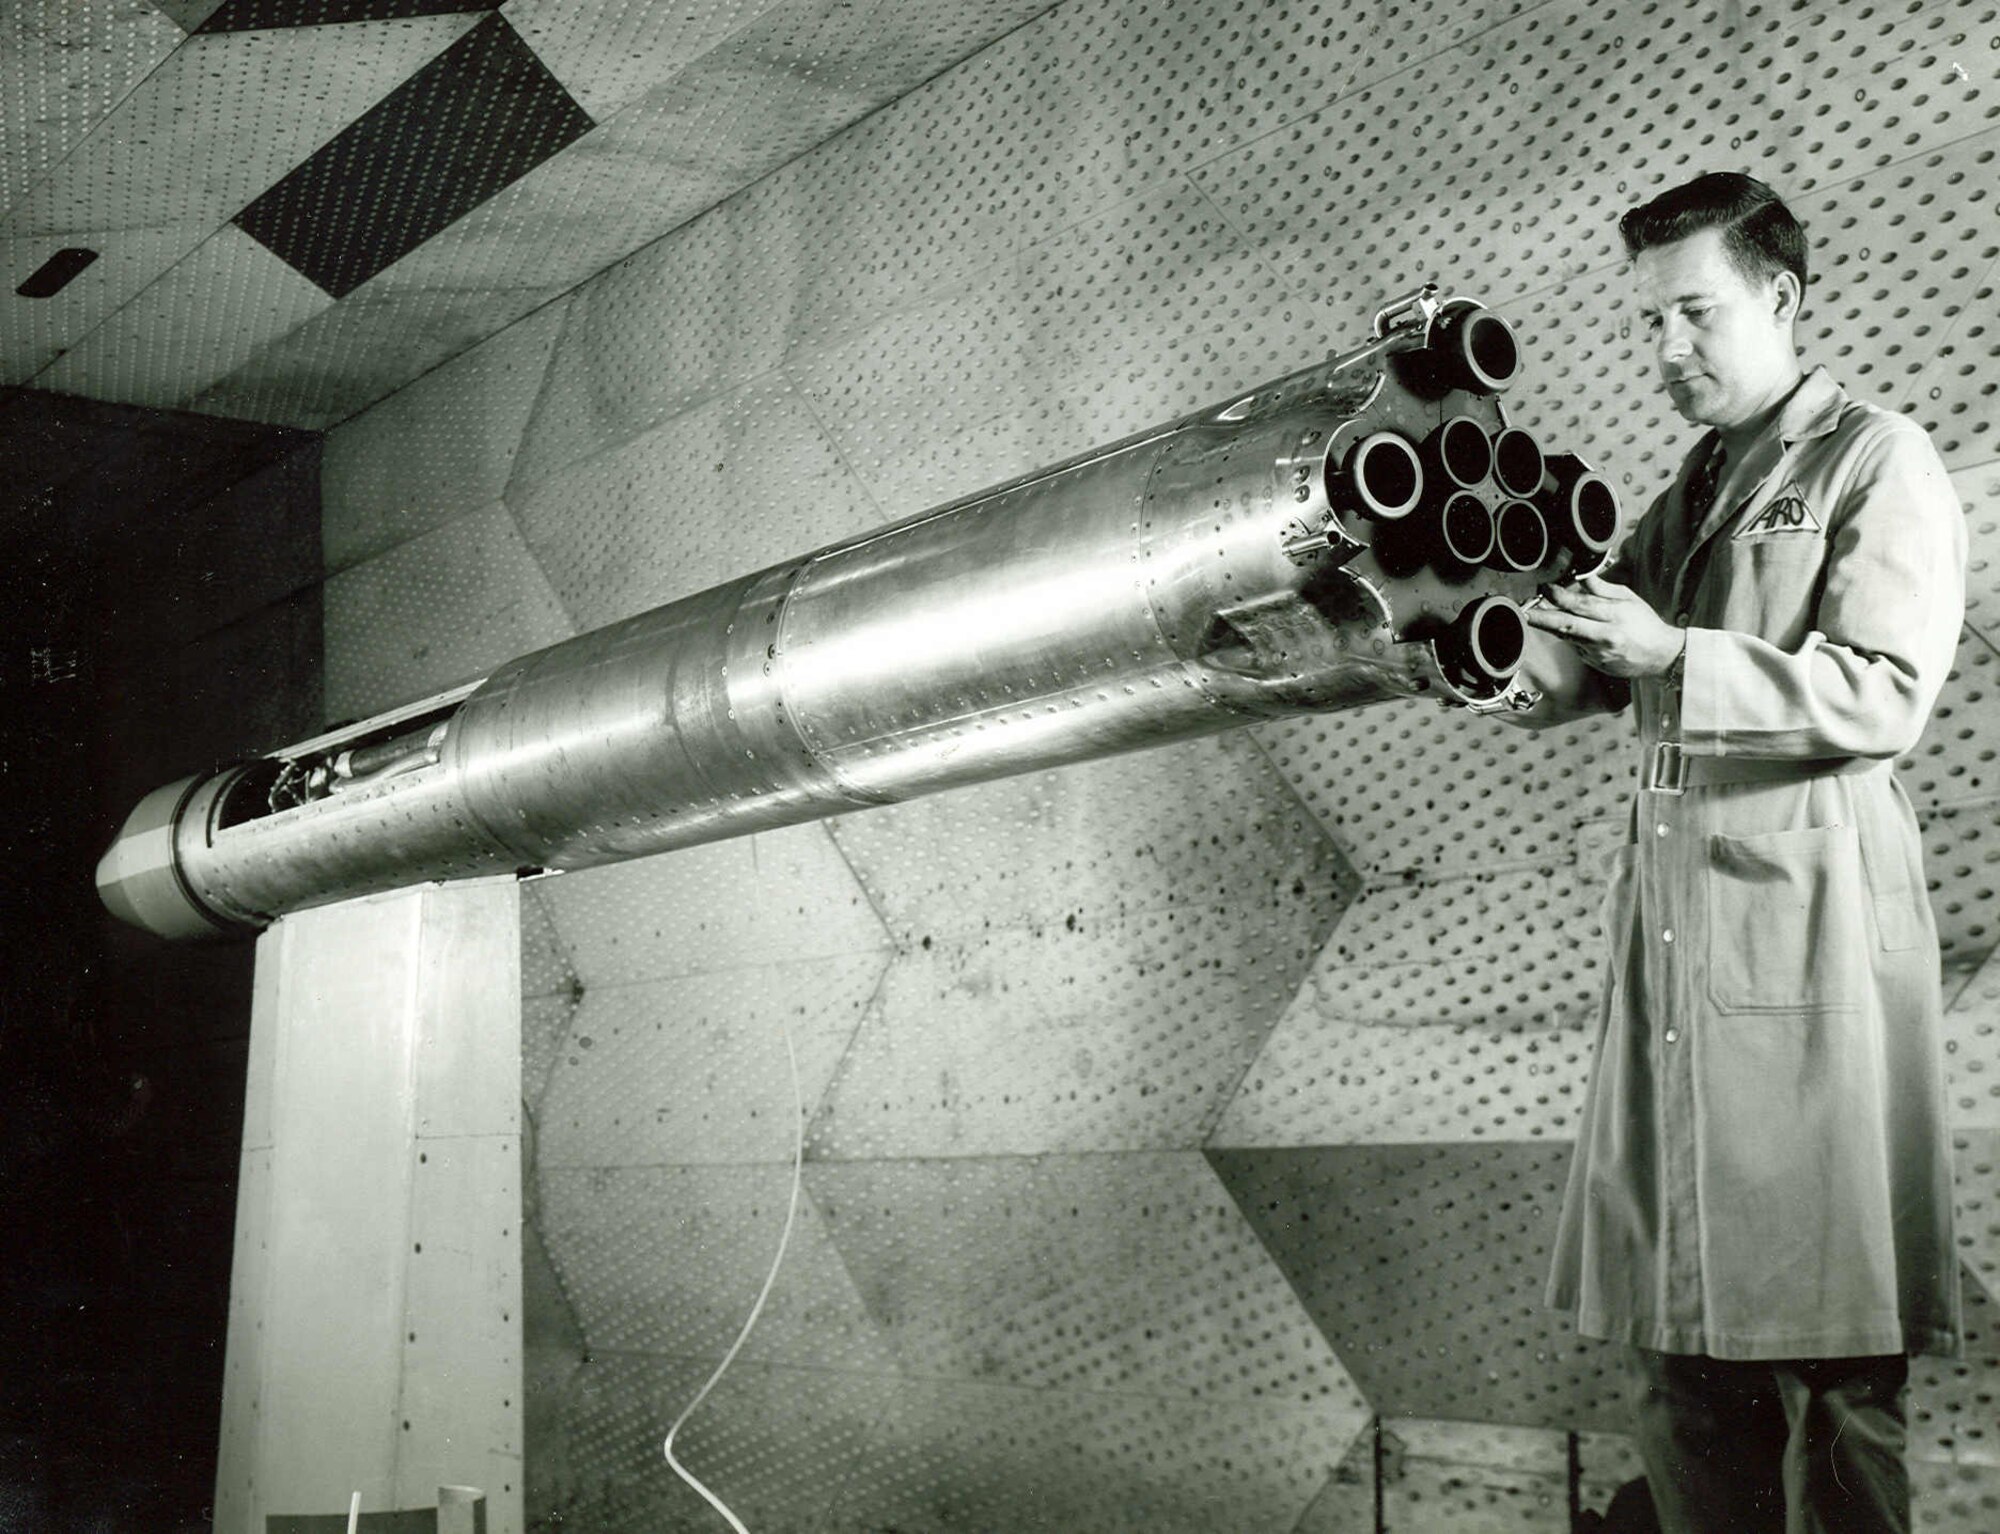 A 1/20th-scale model of first-stage Saturn is prepared for testing in the 16-foot transonic wind tunnel at Arnold Air Force Base in the early 1960s. The purpose of the testing was to study base heating encountered by the space booster’s first stage as it accelerated to supersonic speeds and out of the earth’s atmosphere. (U.S. Air Force photo)